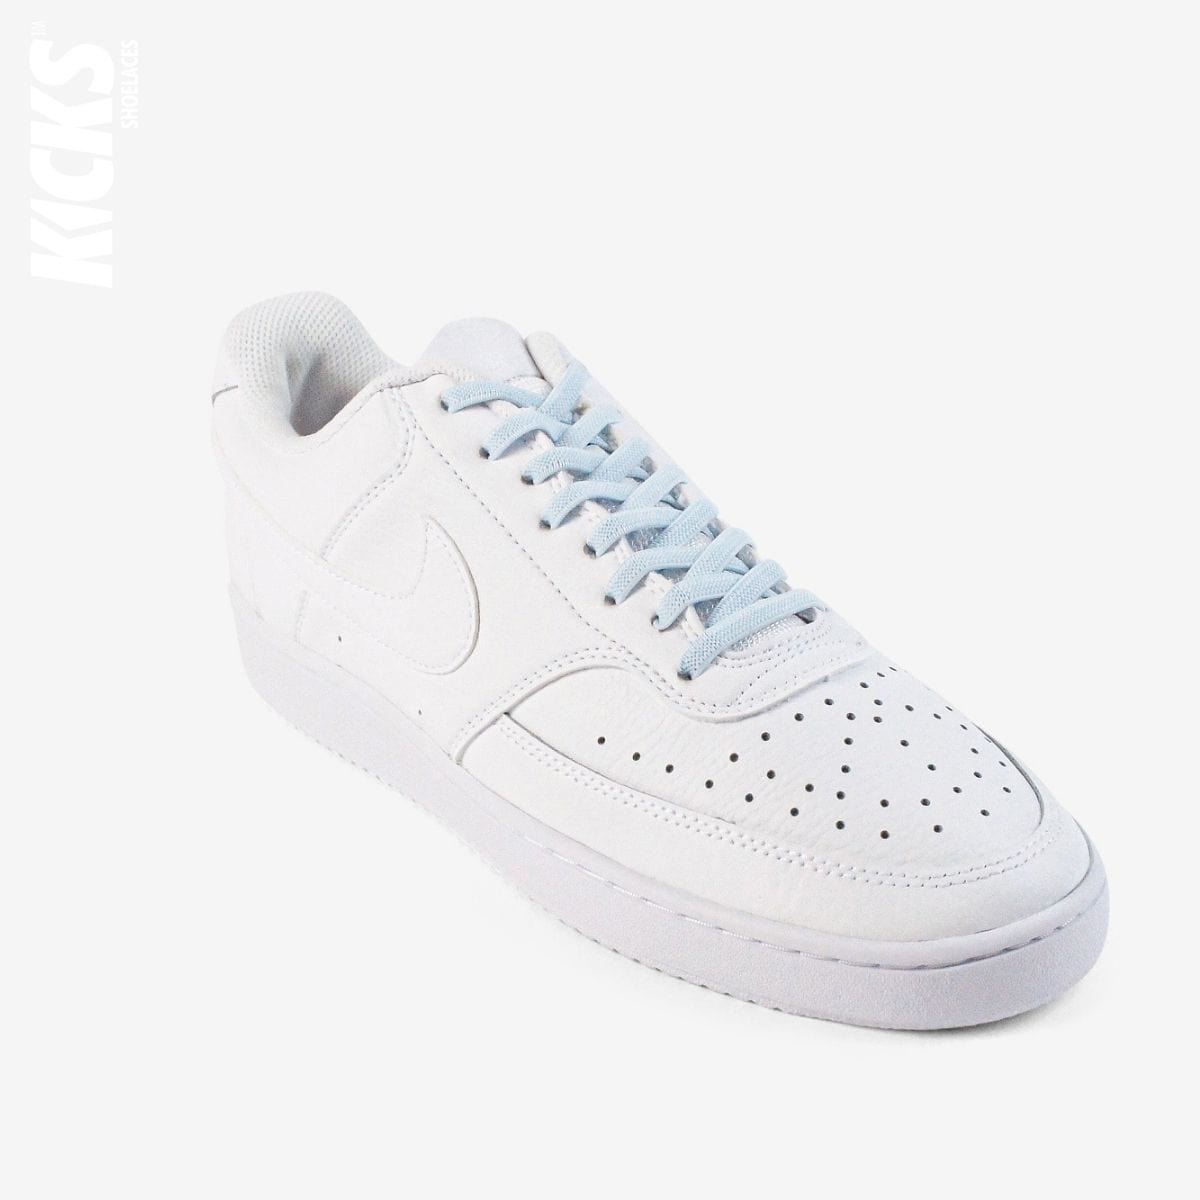 no-tie-shoelaces-with-pastel-blue-laces-on-nike-white-sneakers-by-kicks-shoelaces